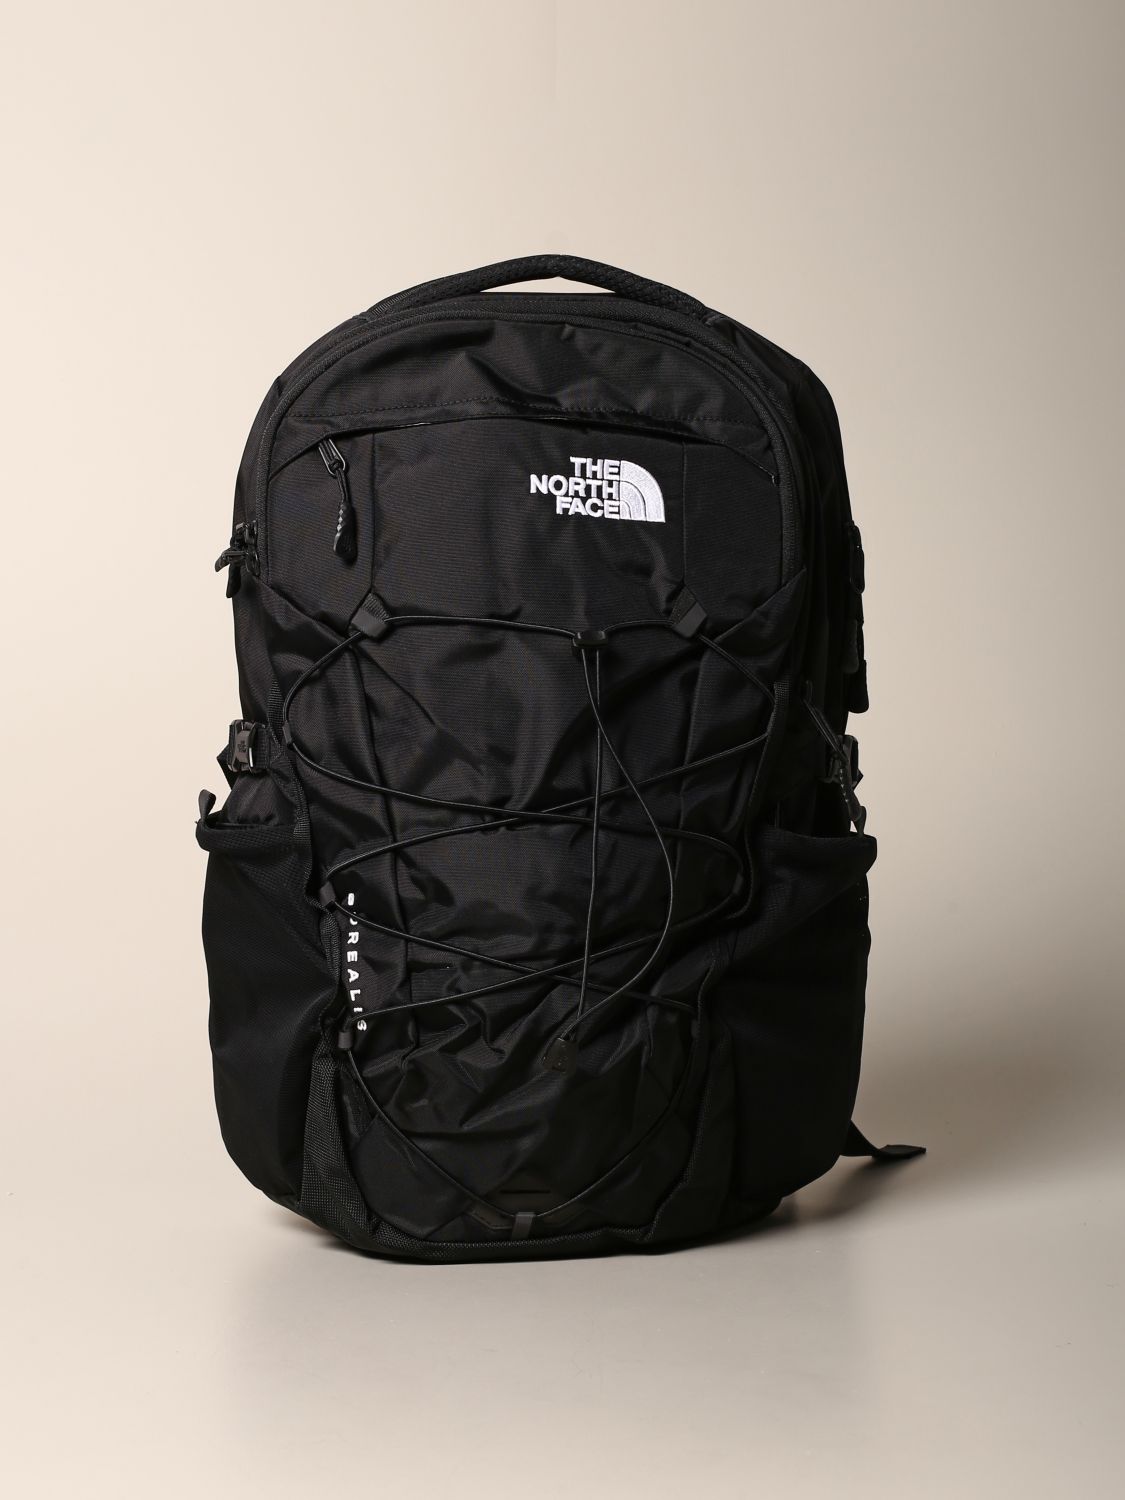 the north face backpack men Cheaper 